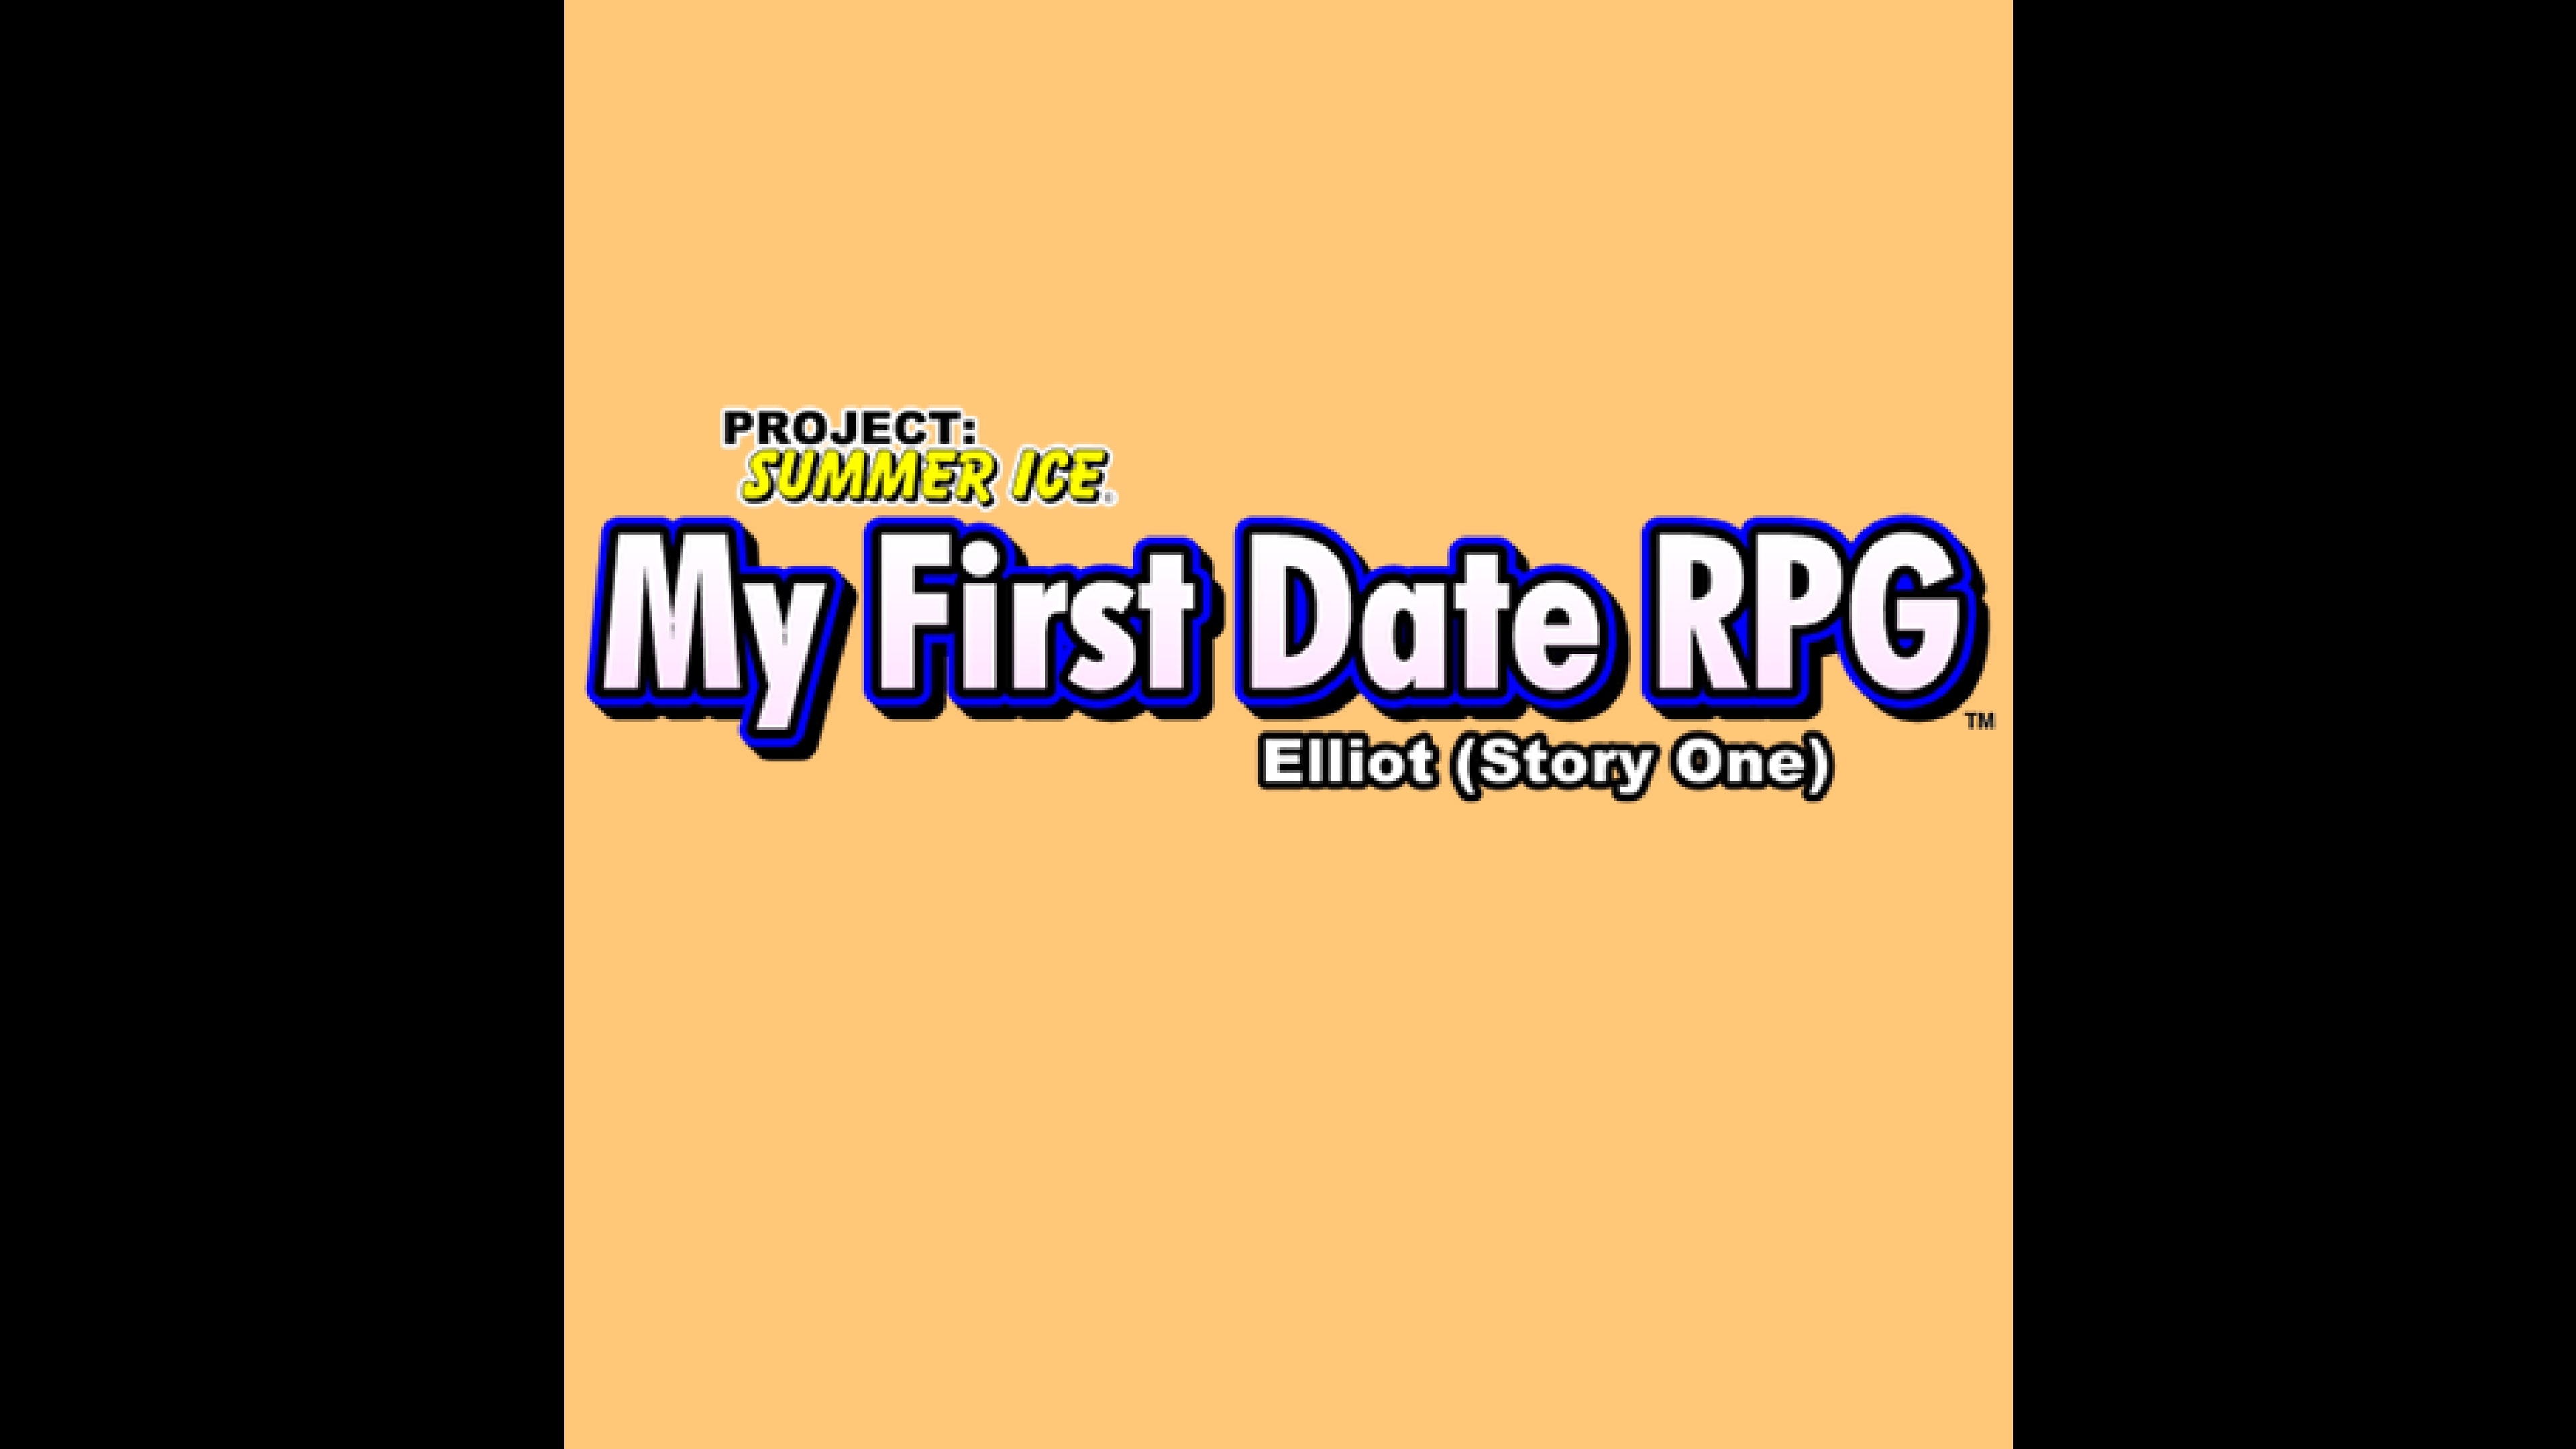 Elliot (Story One) - My First Date RPG